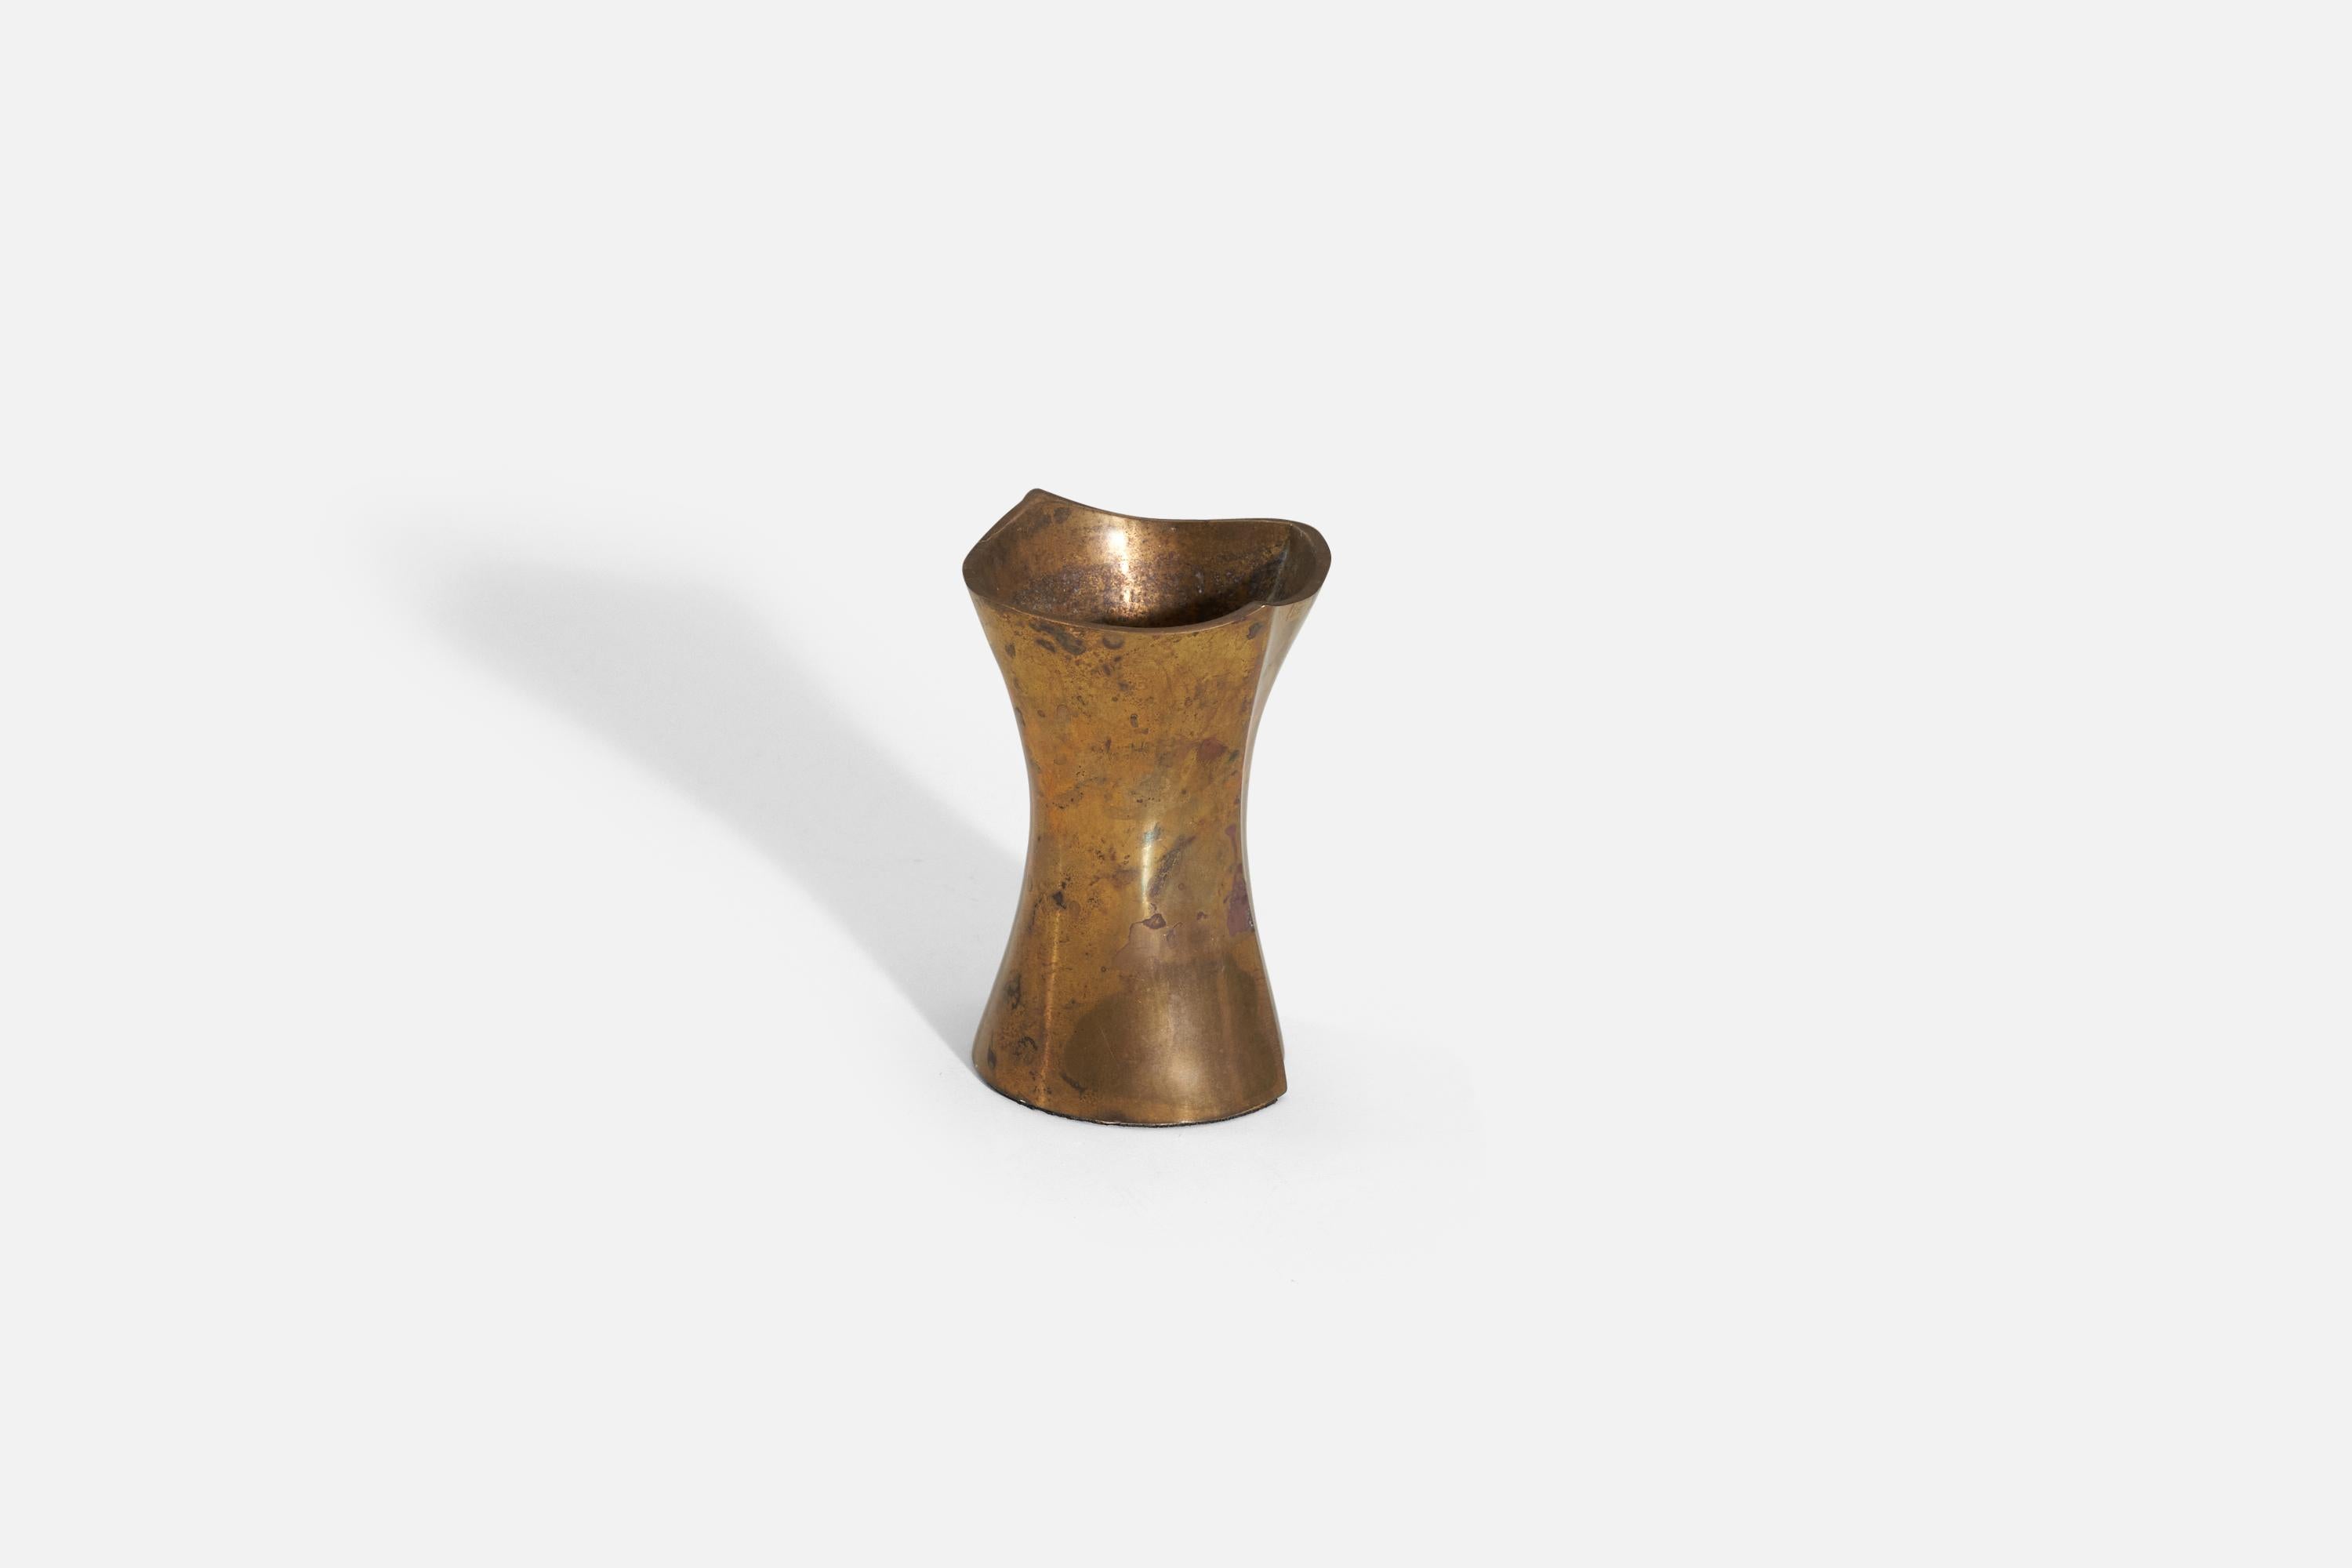 A small cast brass vase, designed and produced in Finland, 1950s.